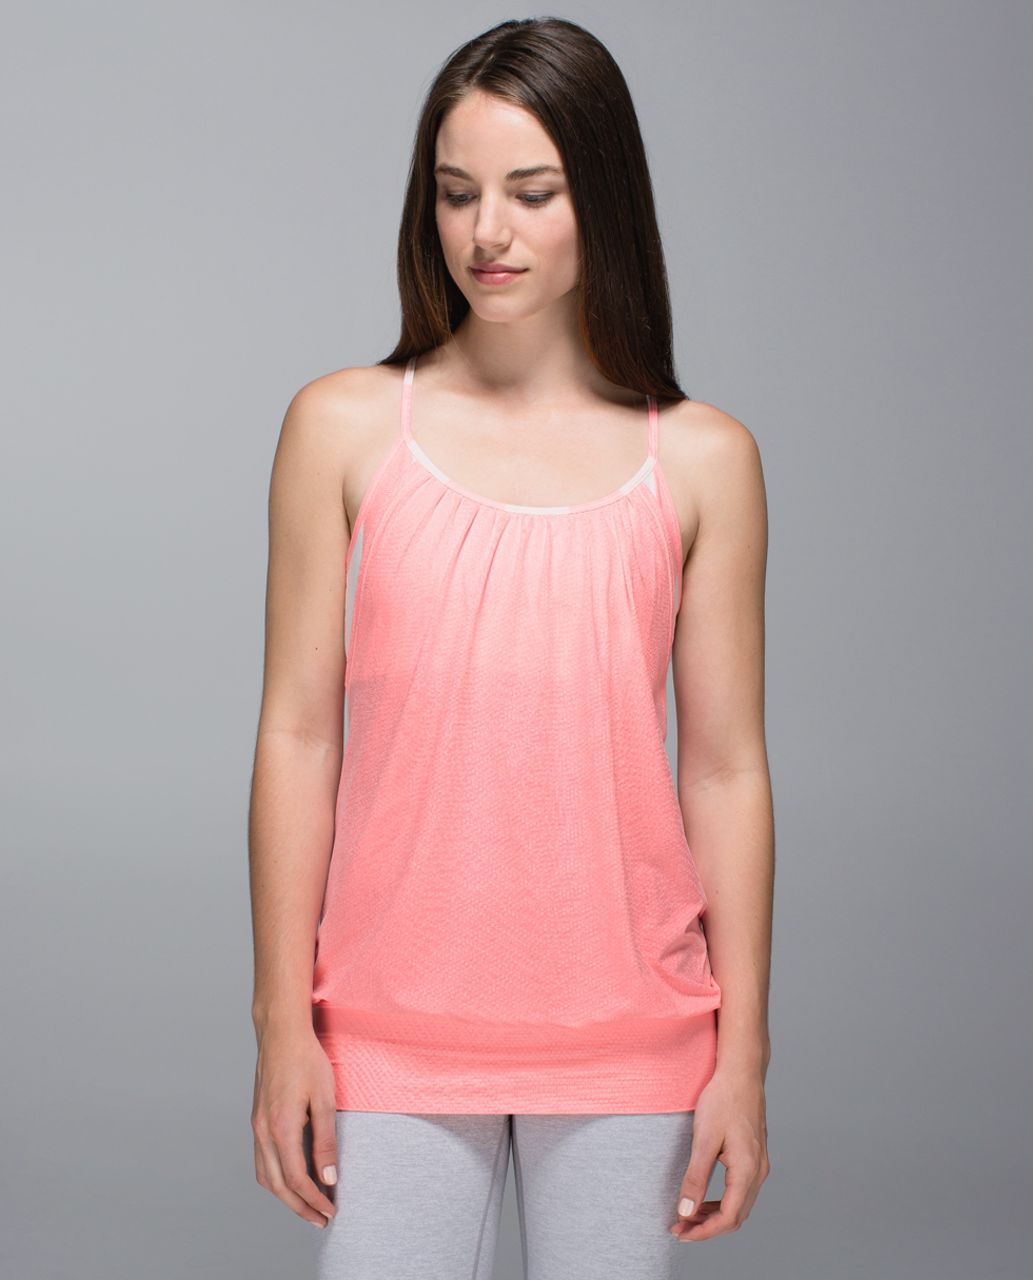 Lululemon No Limits Tank - Bleached Coral / Steep Stripe Bleached Coral Horizontal